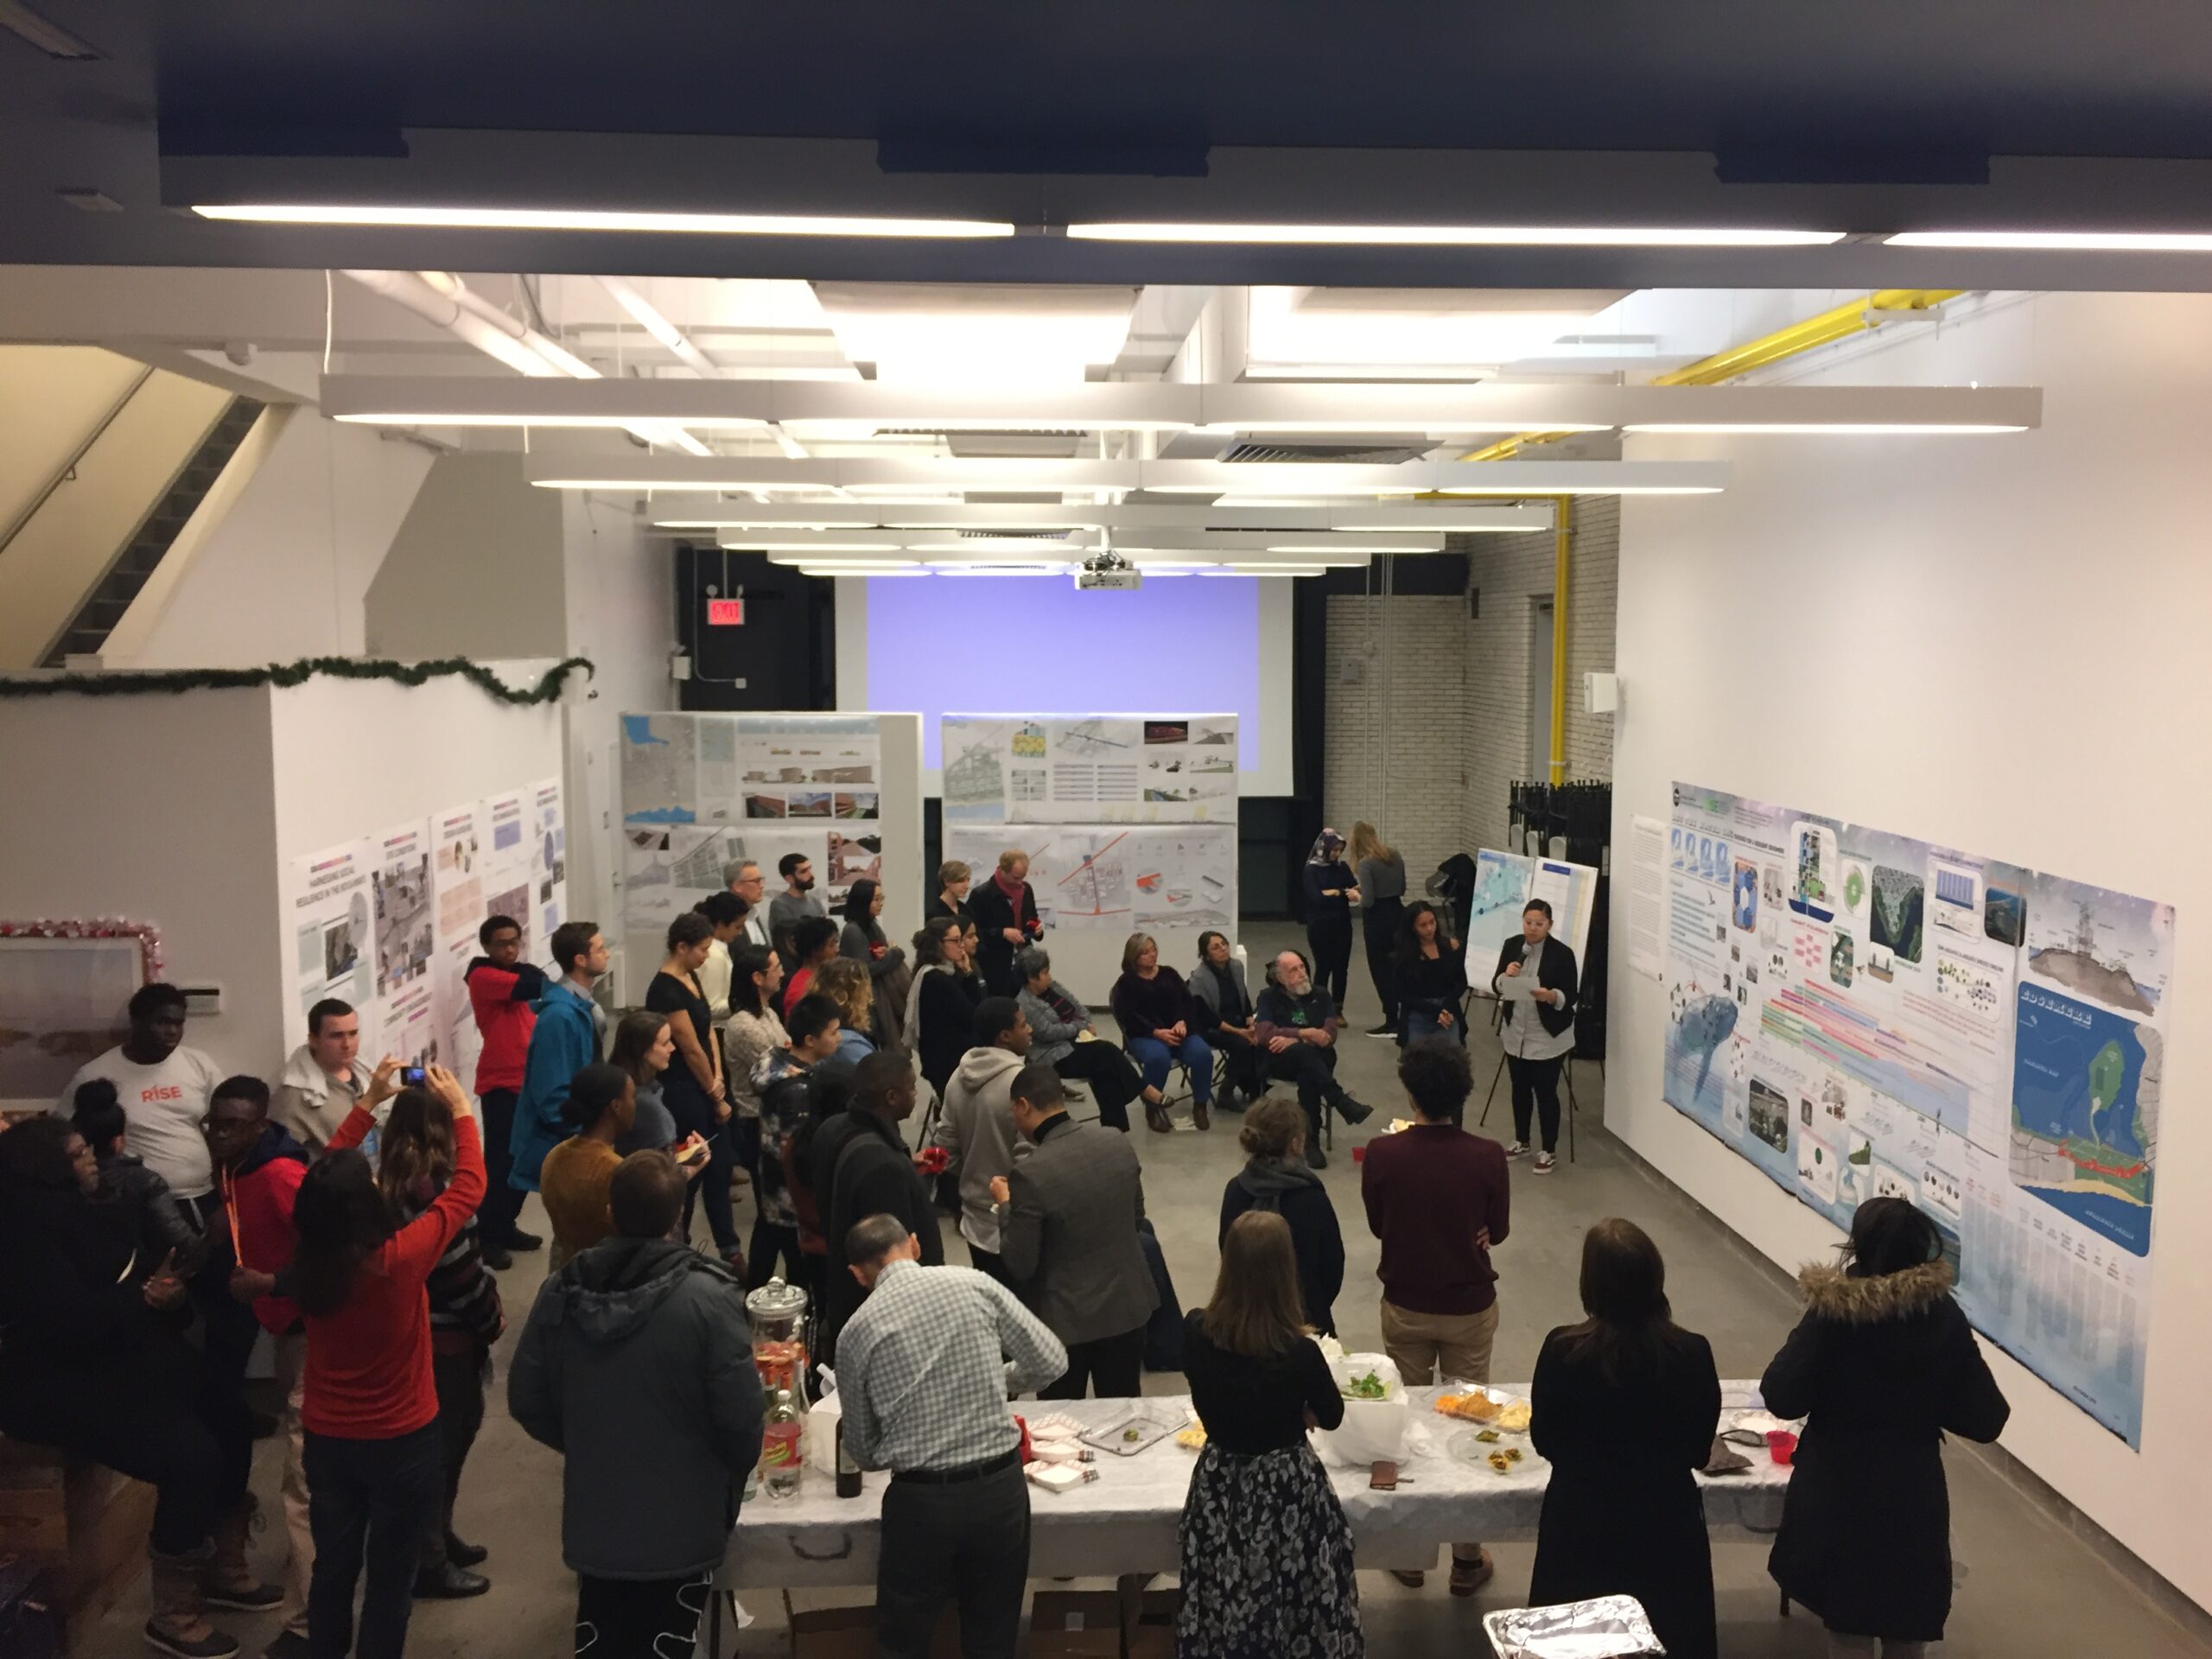 A group of people in a large room. Designs are pinned to the wall and someone is presenting to the group.